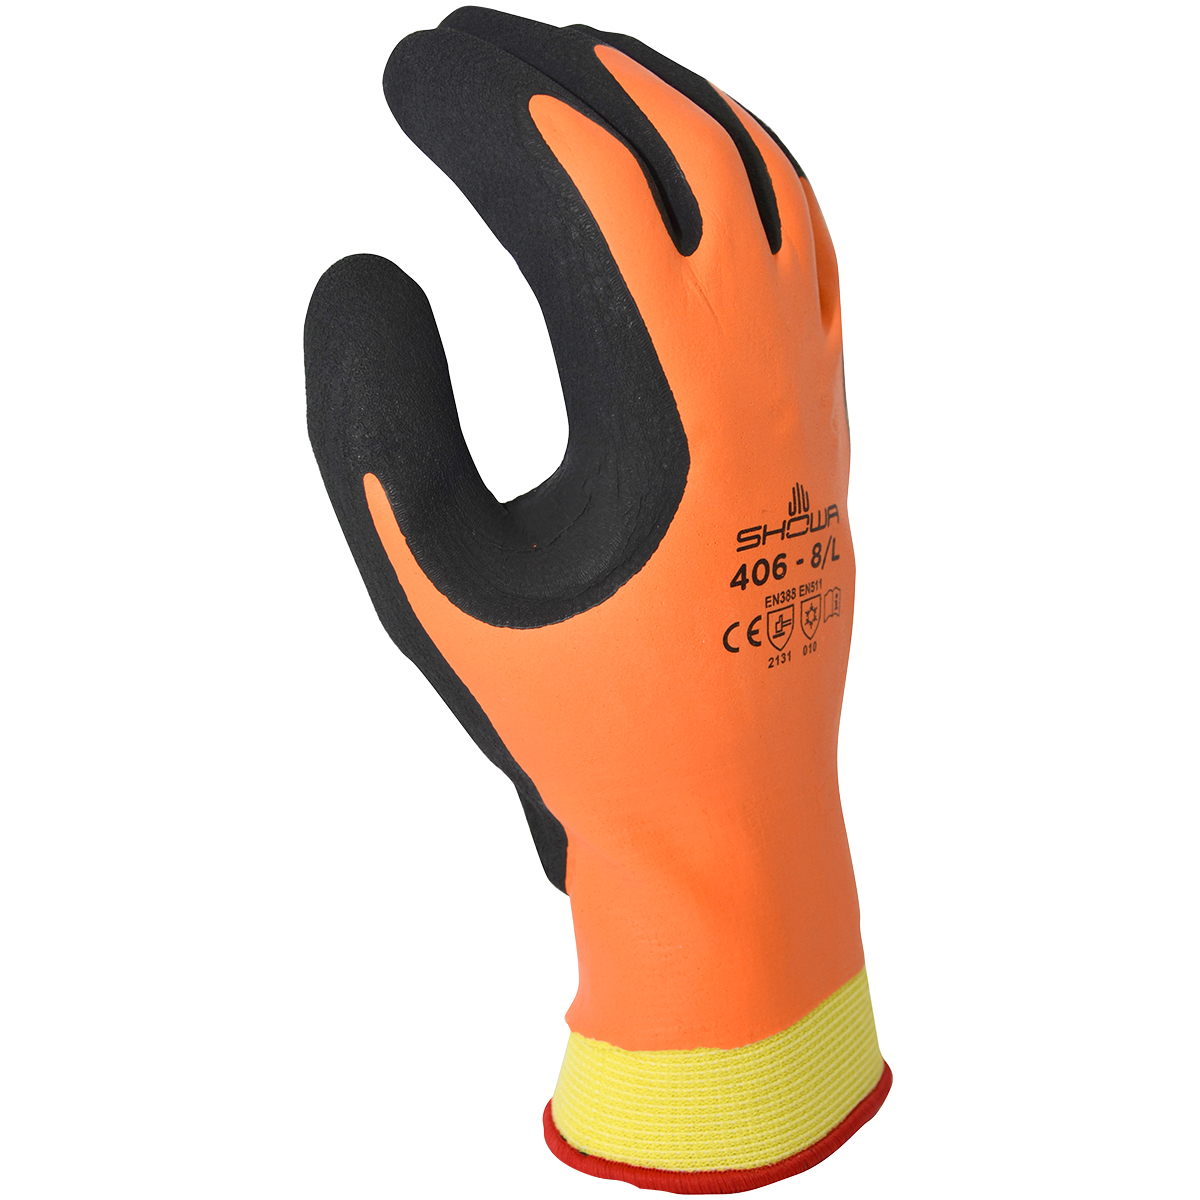 General purpose, dual natural rubber palm coating, acrylic nylon polyester insulated seamless liner, orange w/black coating, rough finish, extra large